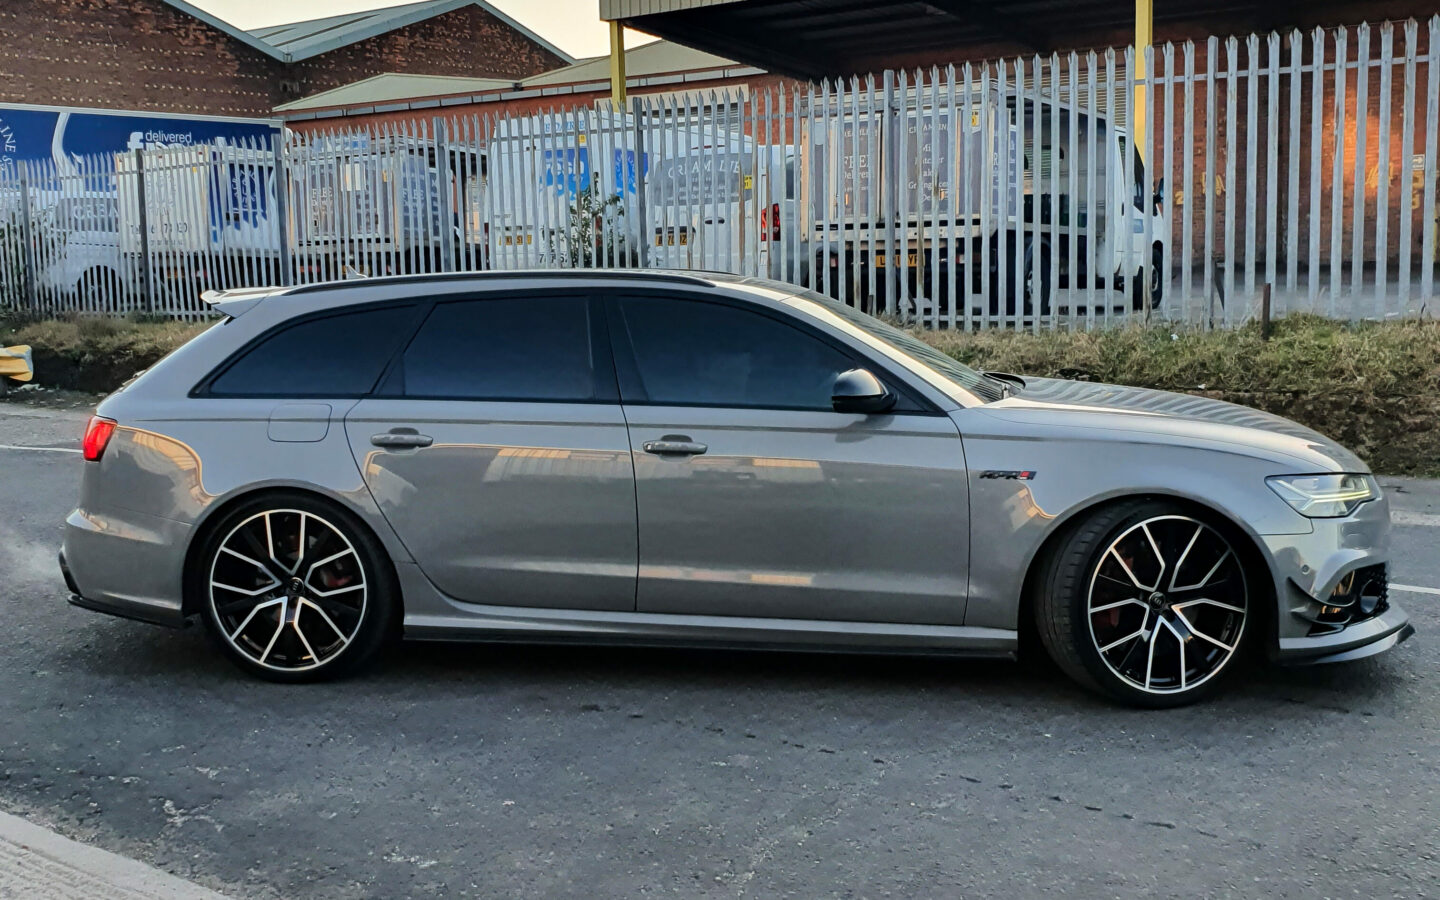 Audi RS6 with Window Tinting on the drivers, passengers, and rear windows